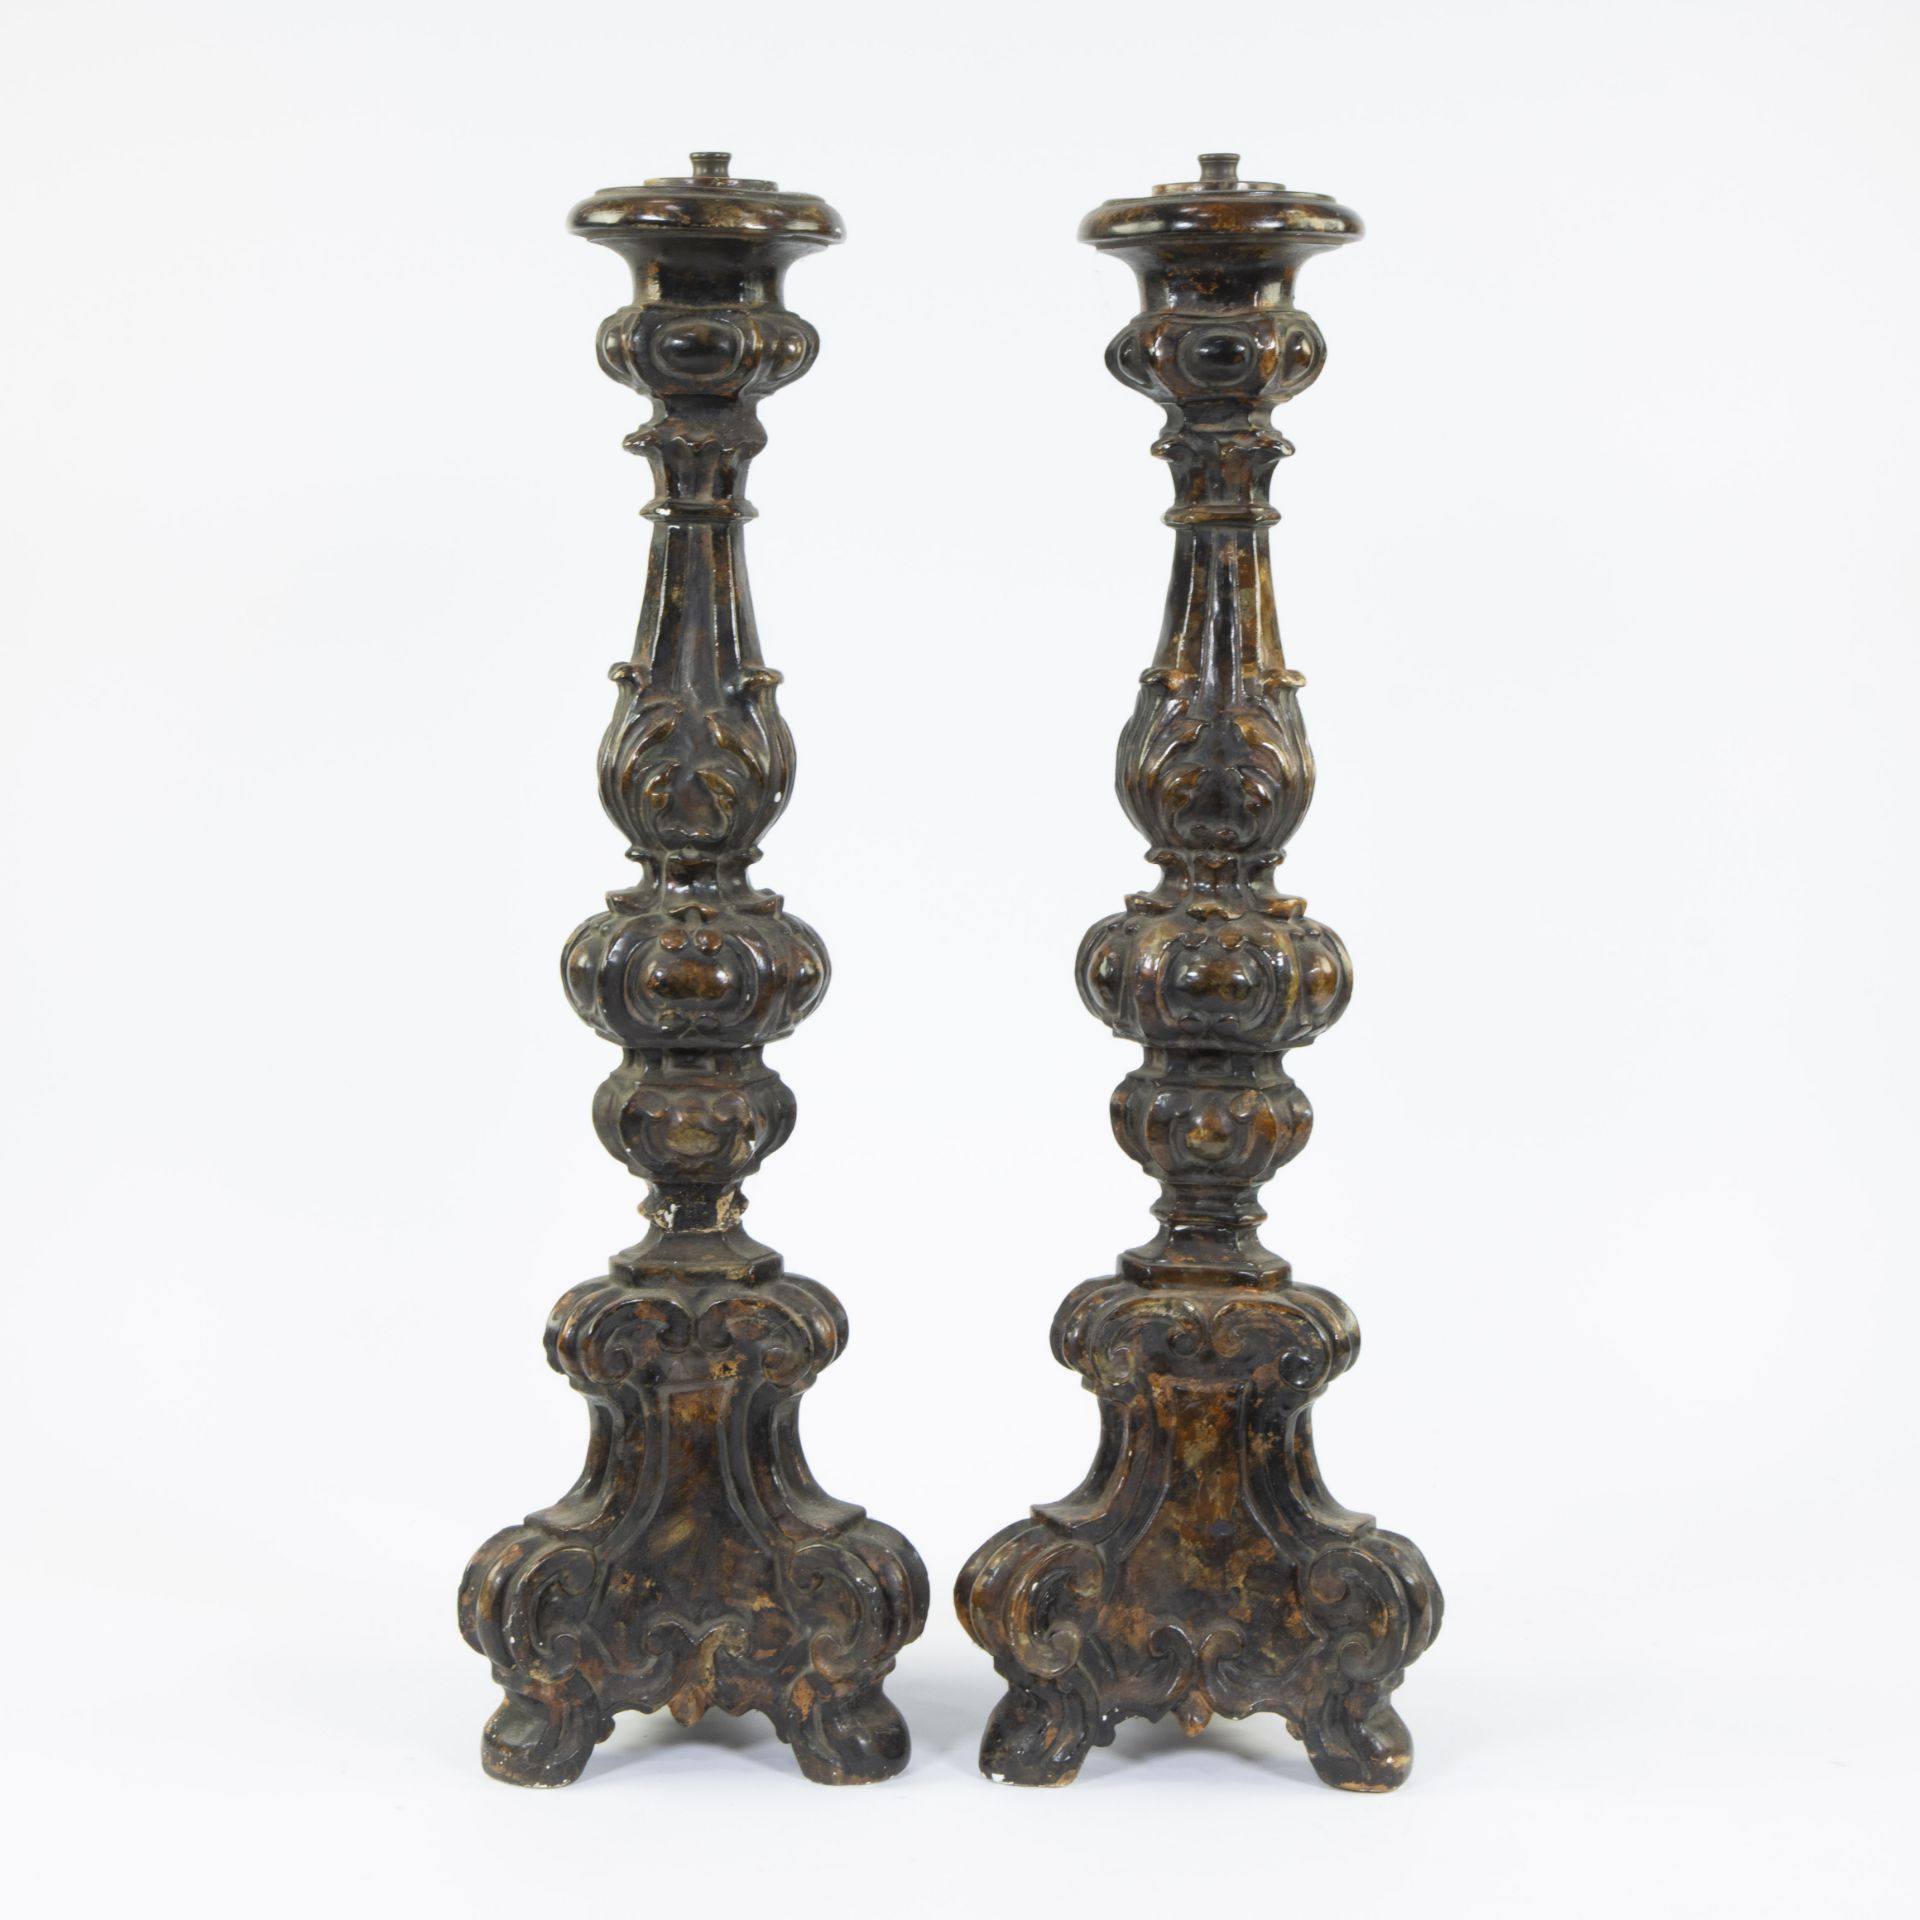 Wooden candlesticks 18th century with traces of polychromy converted to lampadaire - Image 3 of 4